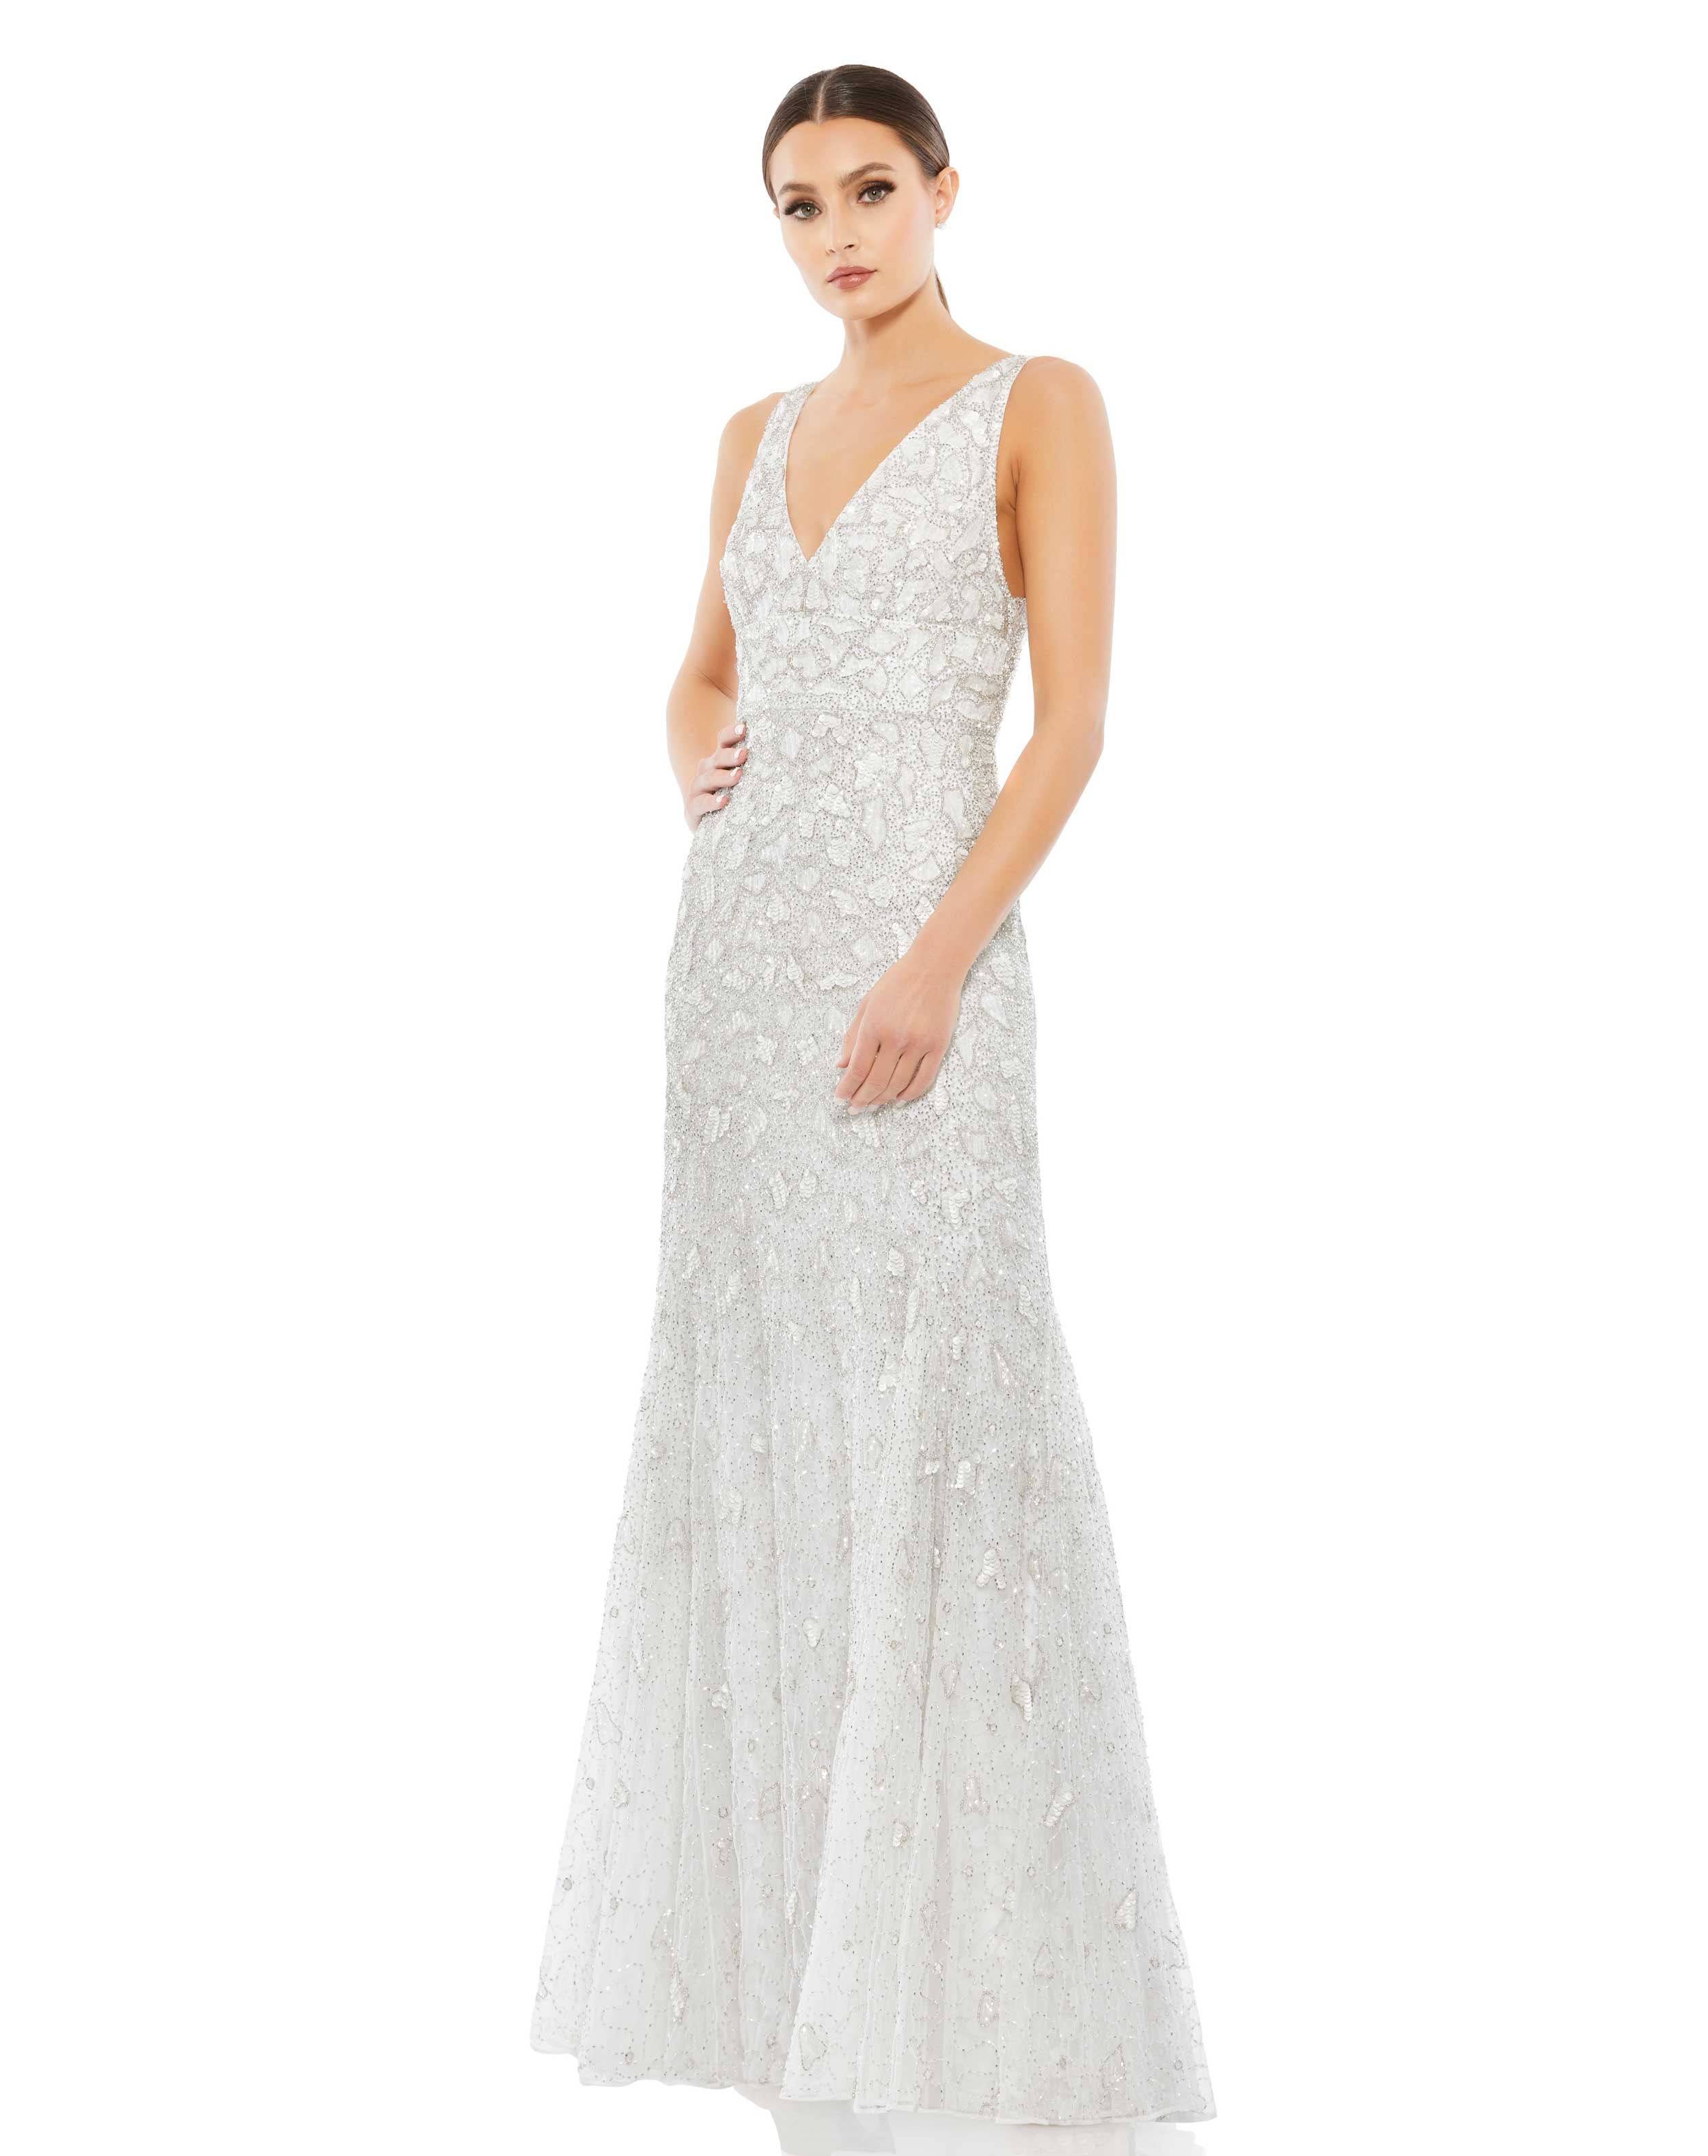 Hand Embellished Sleeveless Beaded Gown with Sweeping Train - FINAL SALE